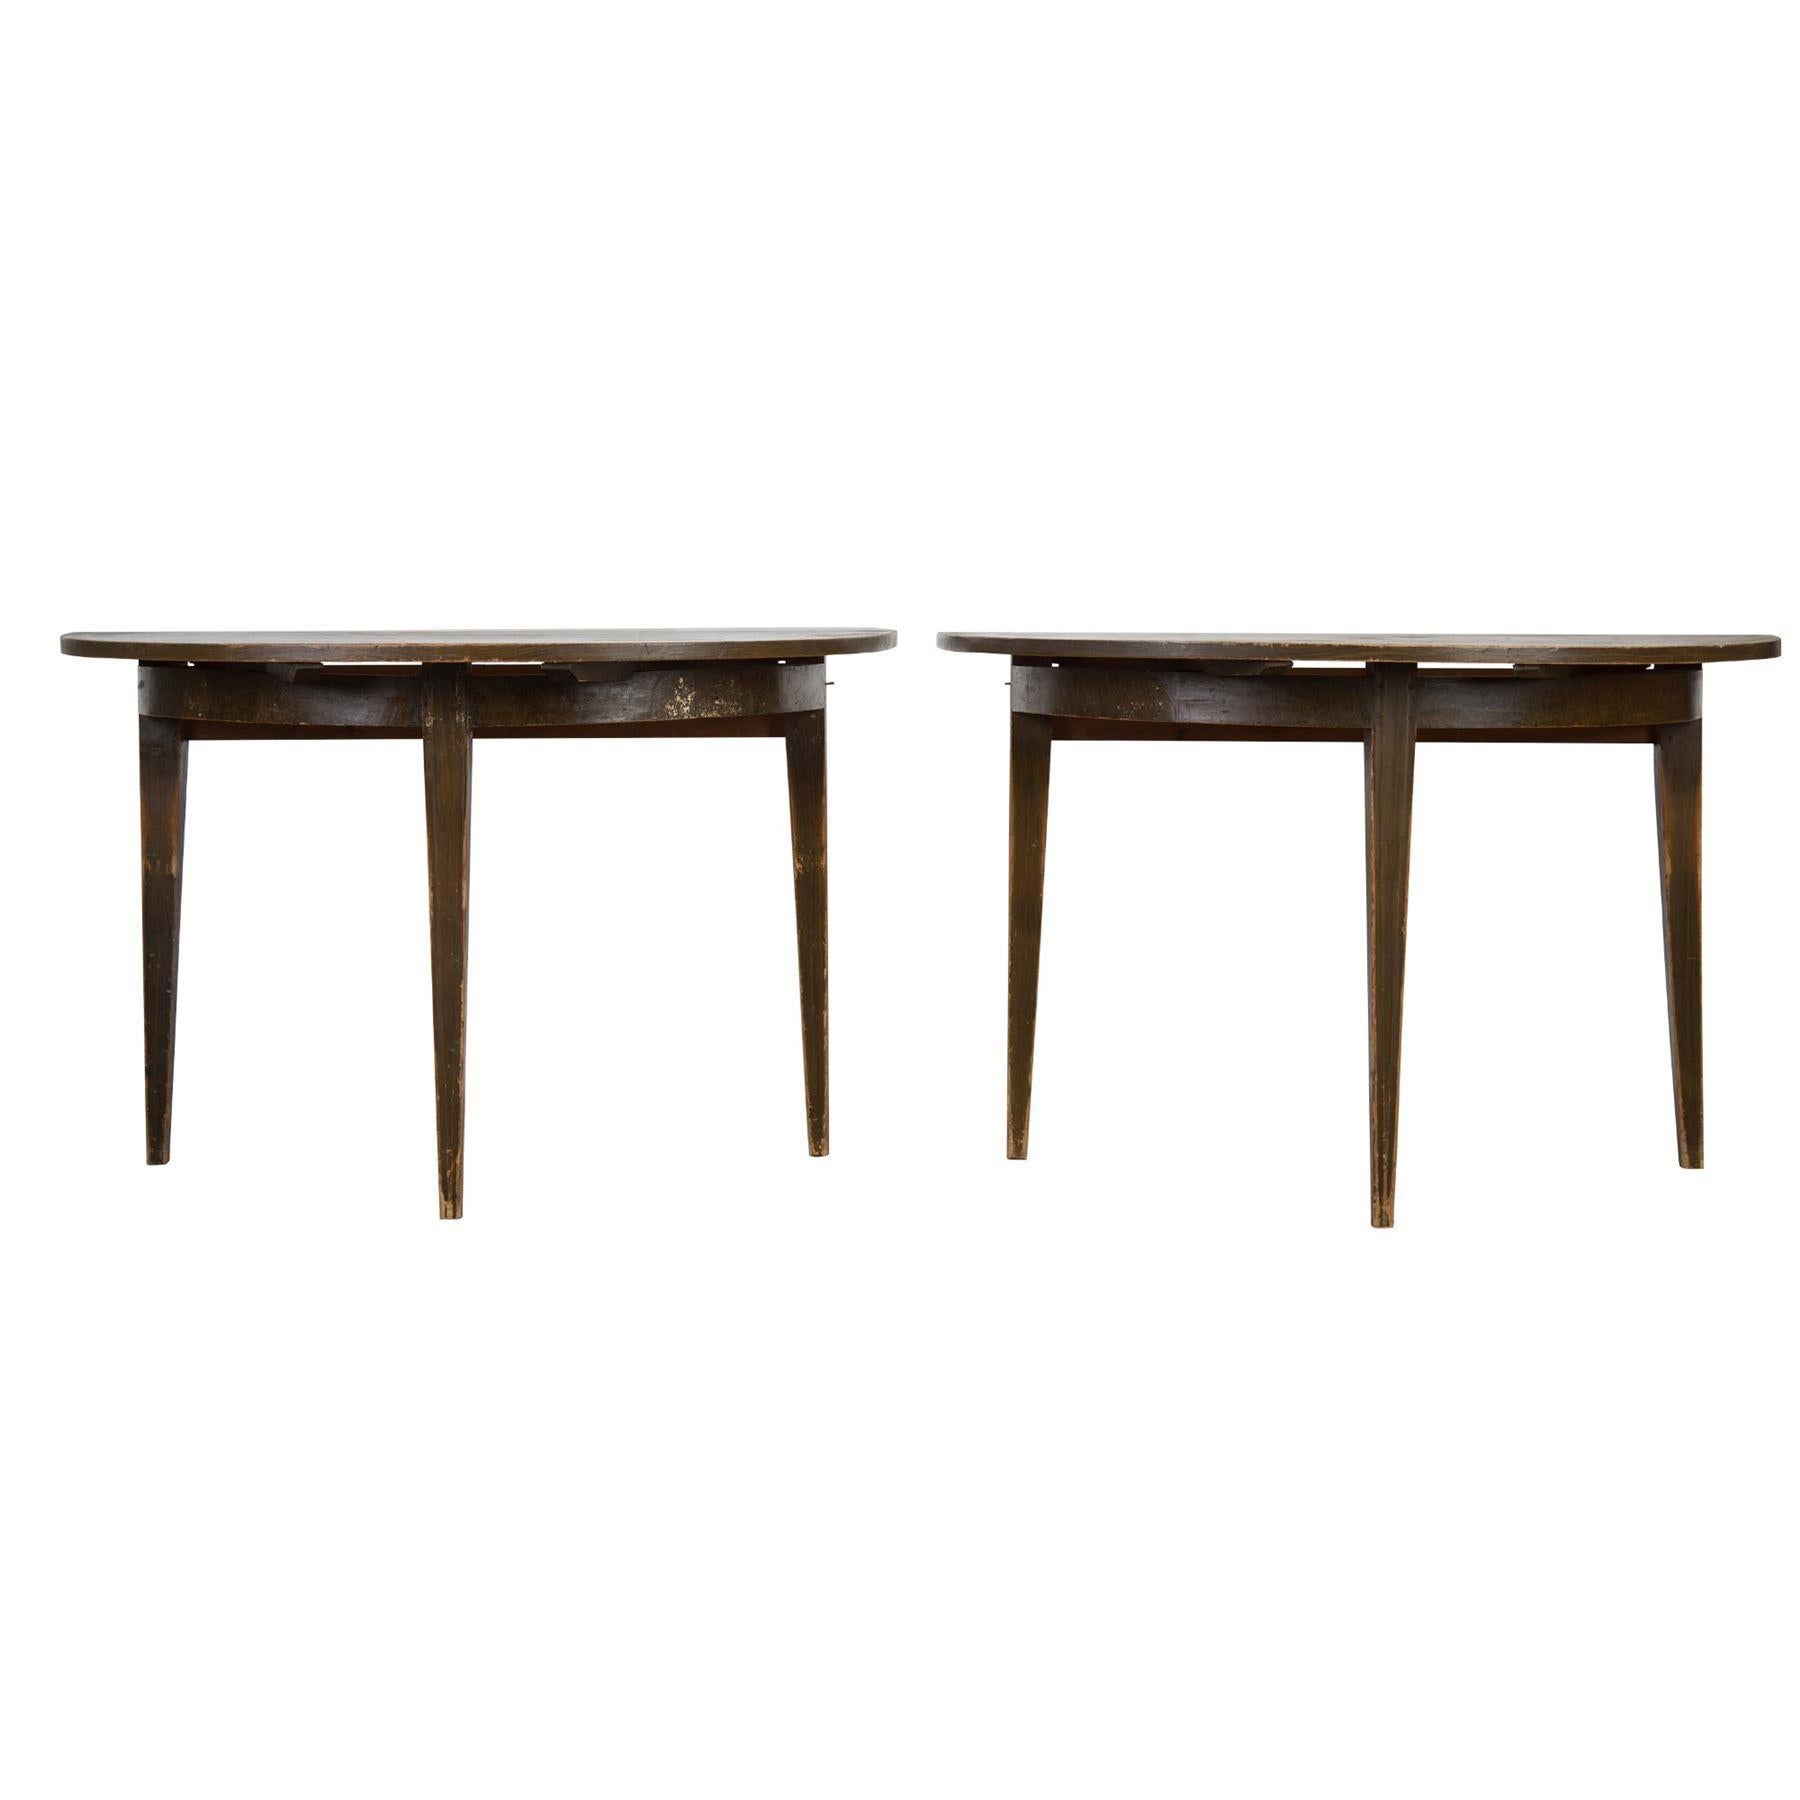 A pair of 18th century Gustavian demilune tables in original paint.